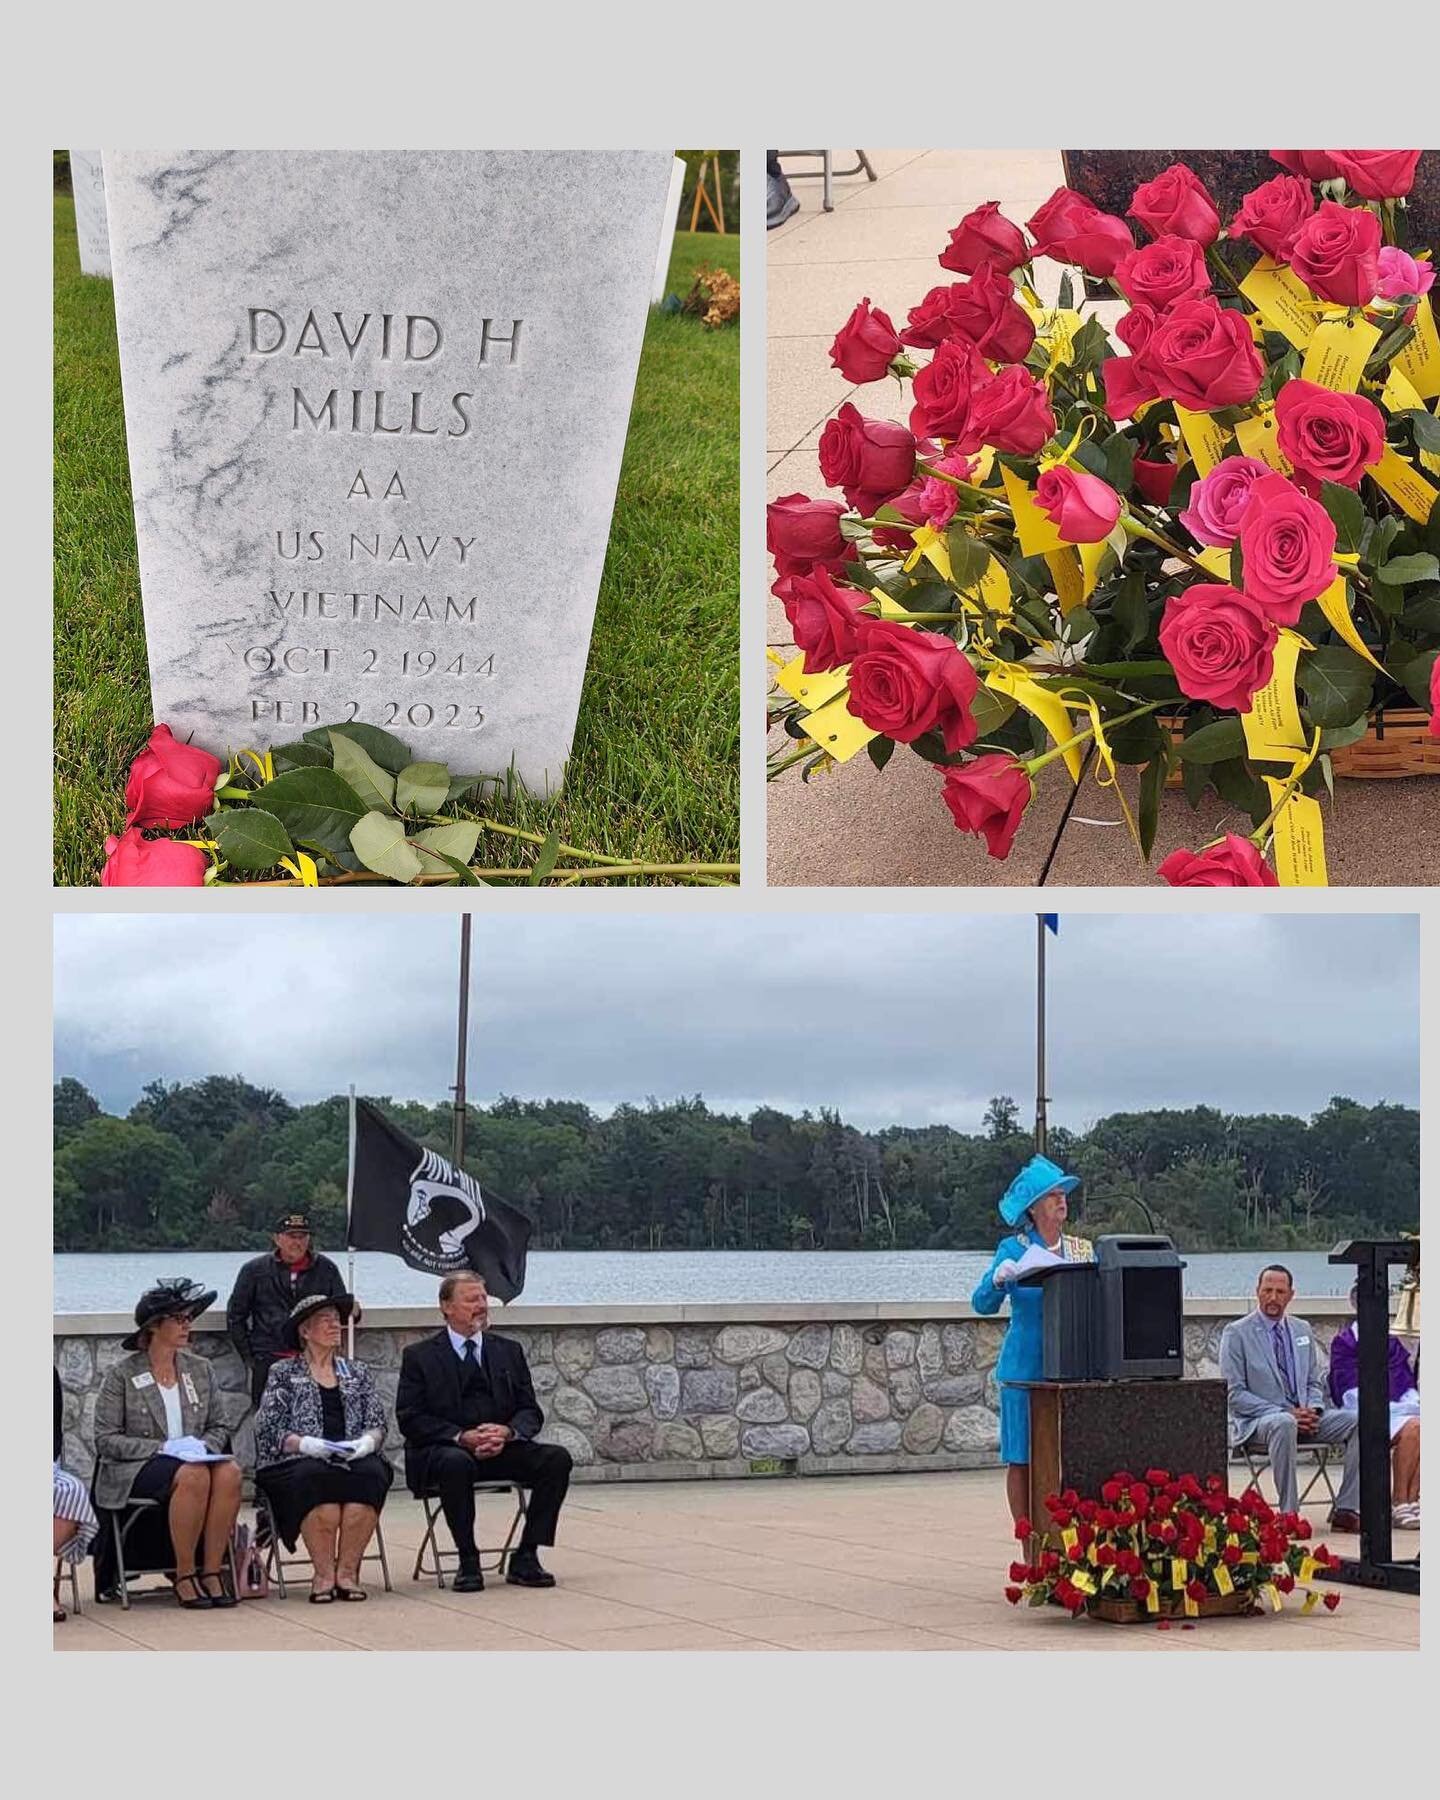 Last month, Michigan Daughters of the American Revolution chapters throughout the state attended unaccompanied veterans' funerals. These veterans had no known next of kin at the time of their burial last year. It was an honor to attend and pay our re